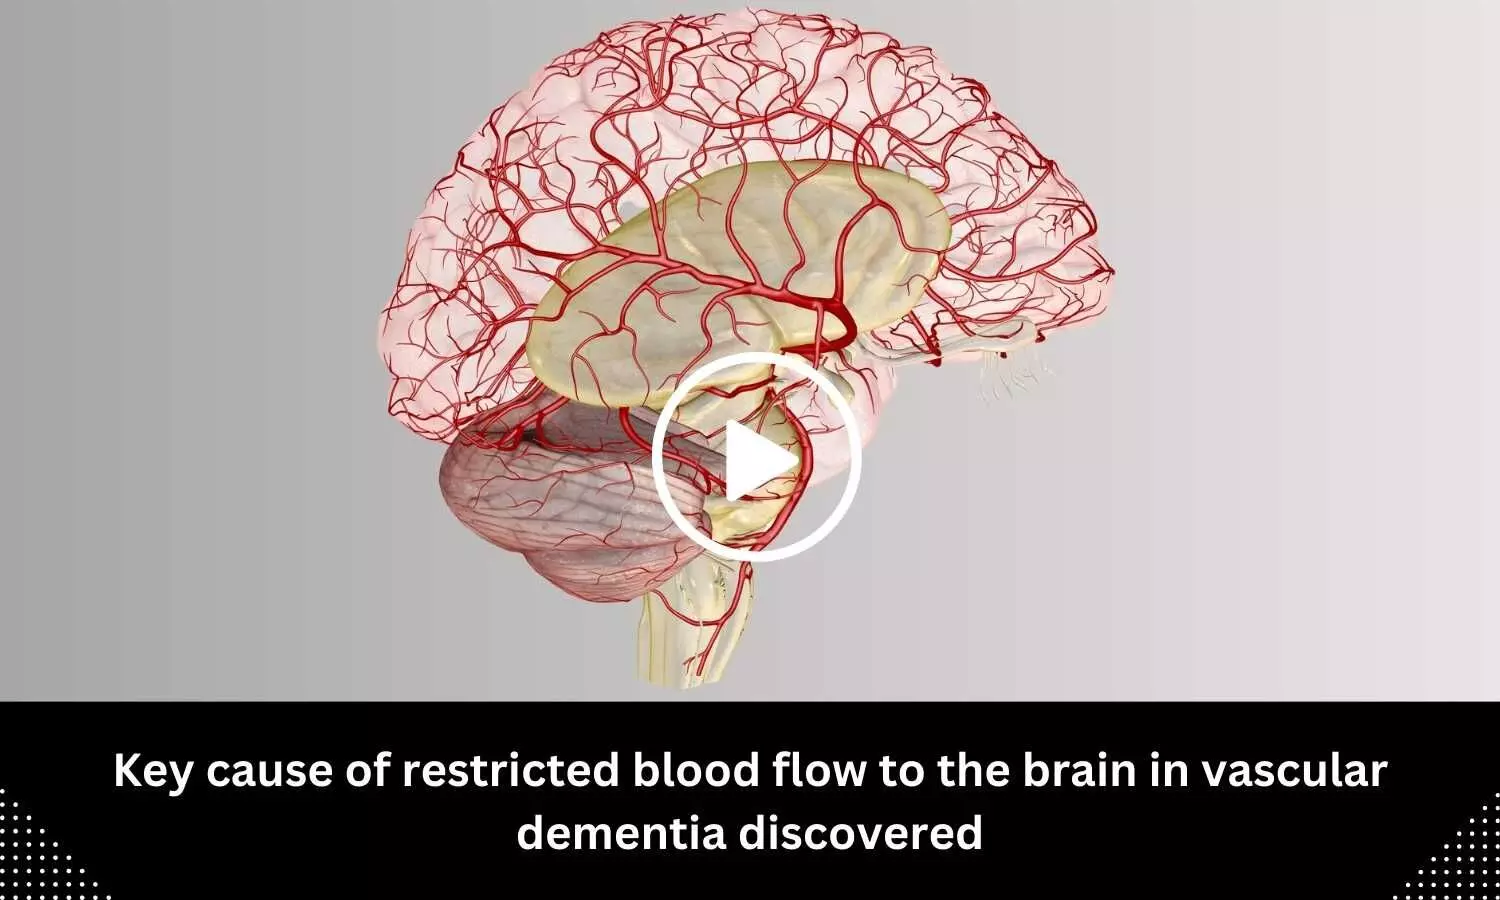 Key cause of restricted blood flow to the brain in vascular dementia discovered